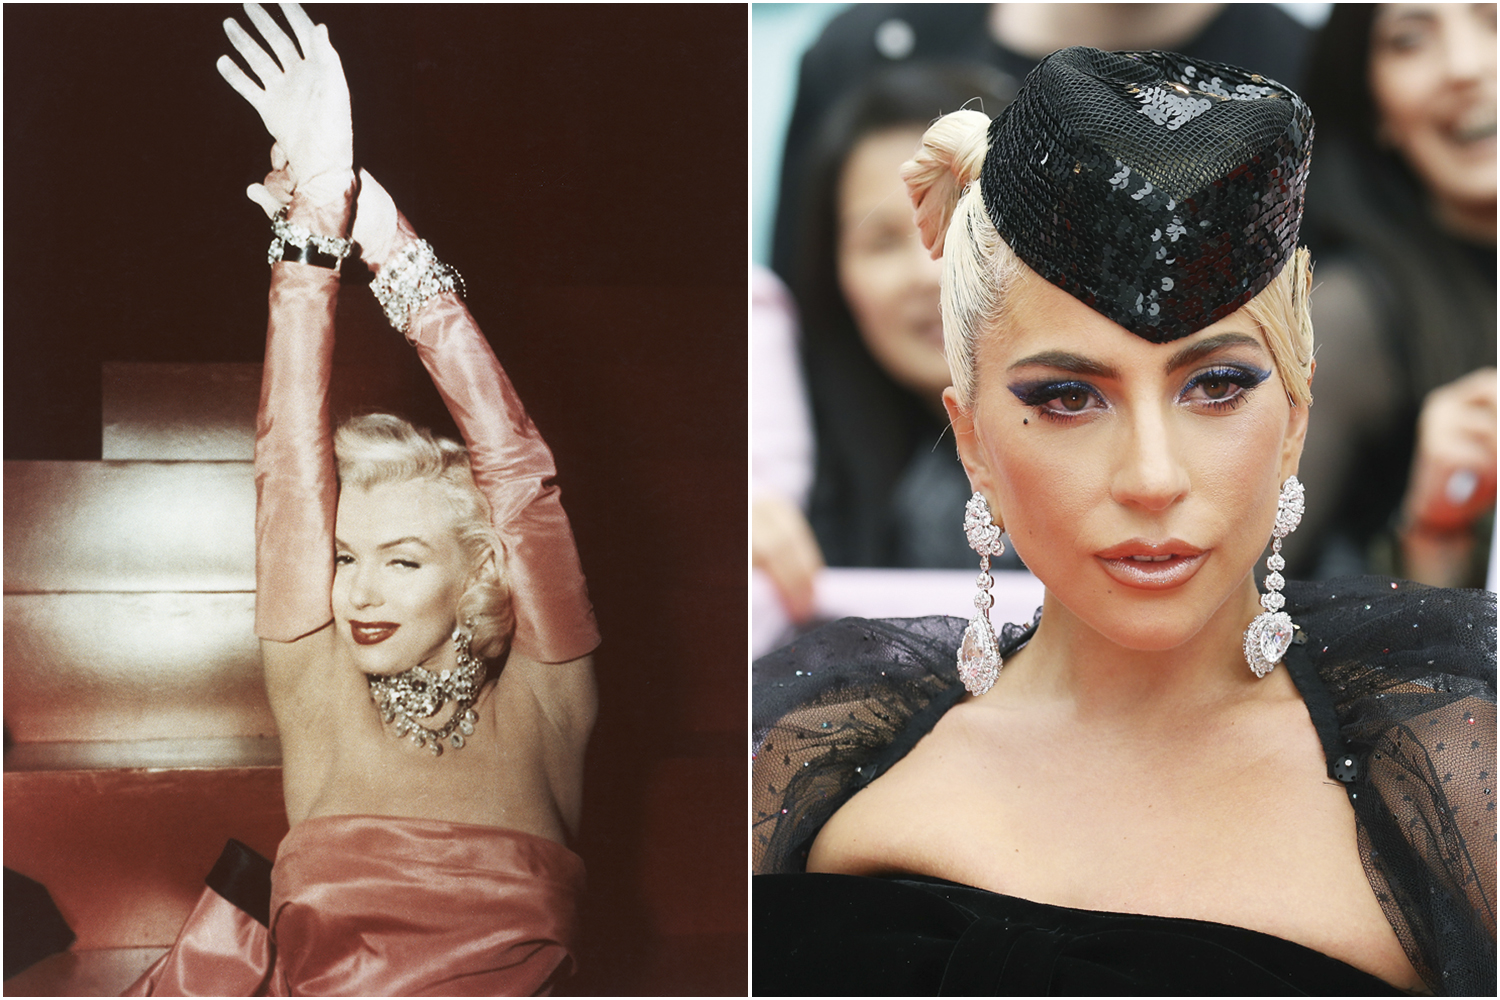 BEST FRIENDS - Fascination: natural in Marilyn (left) and artificial in Lady Gaga -